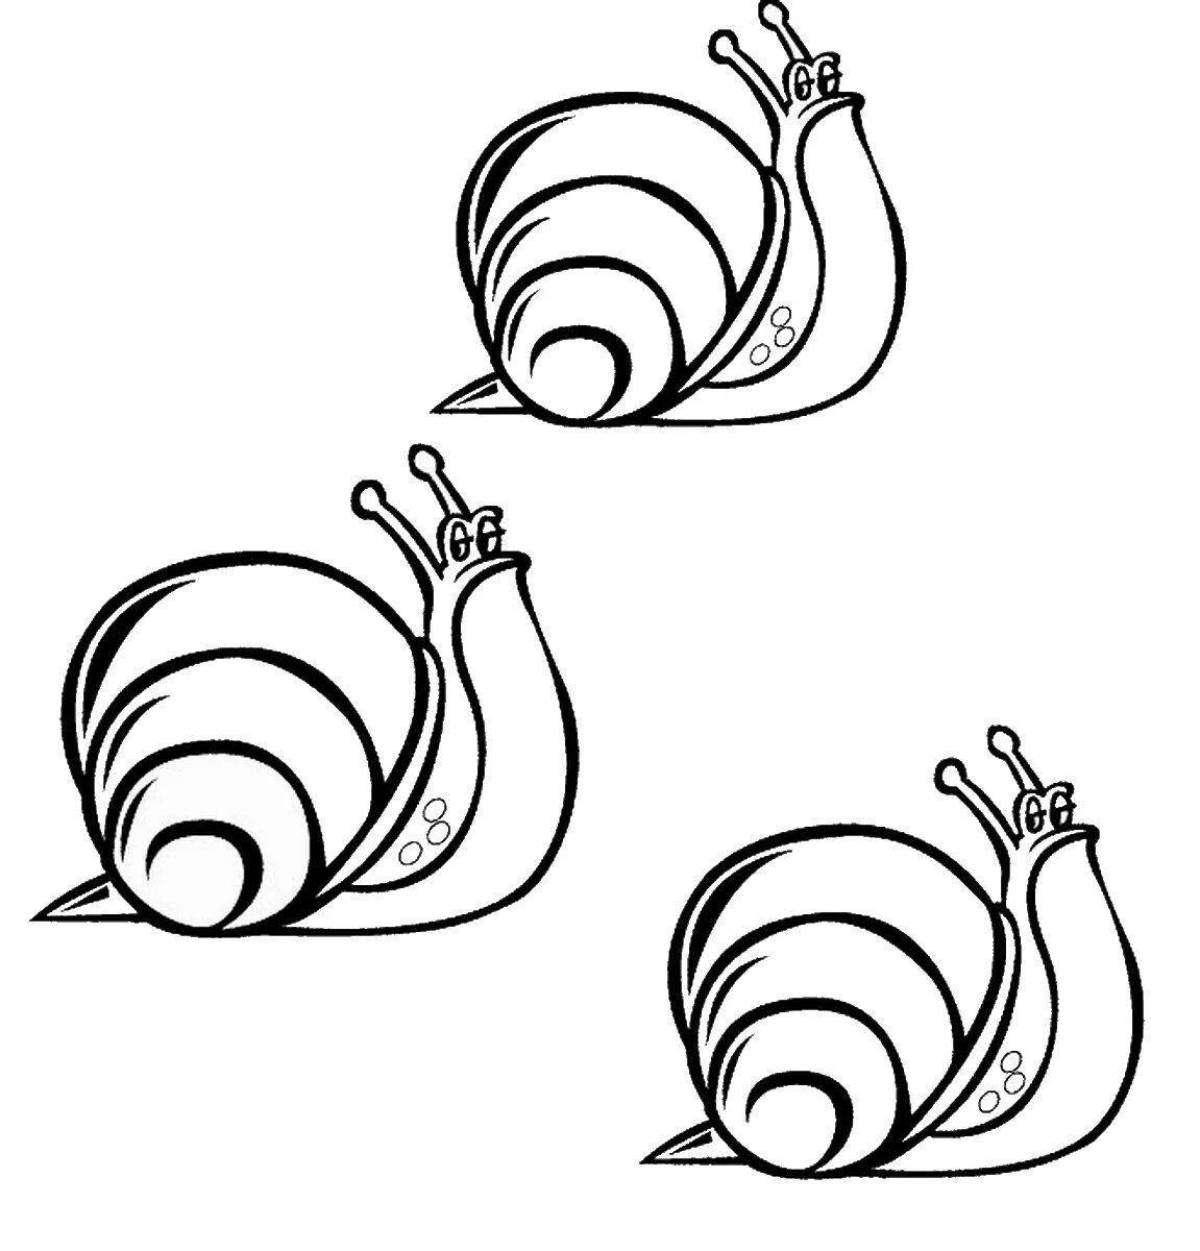 Fun drawing of a snail for kids